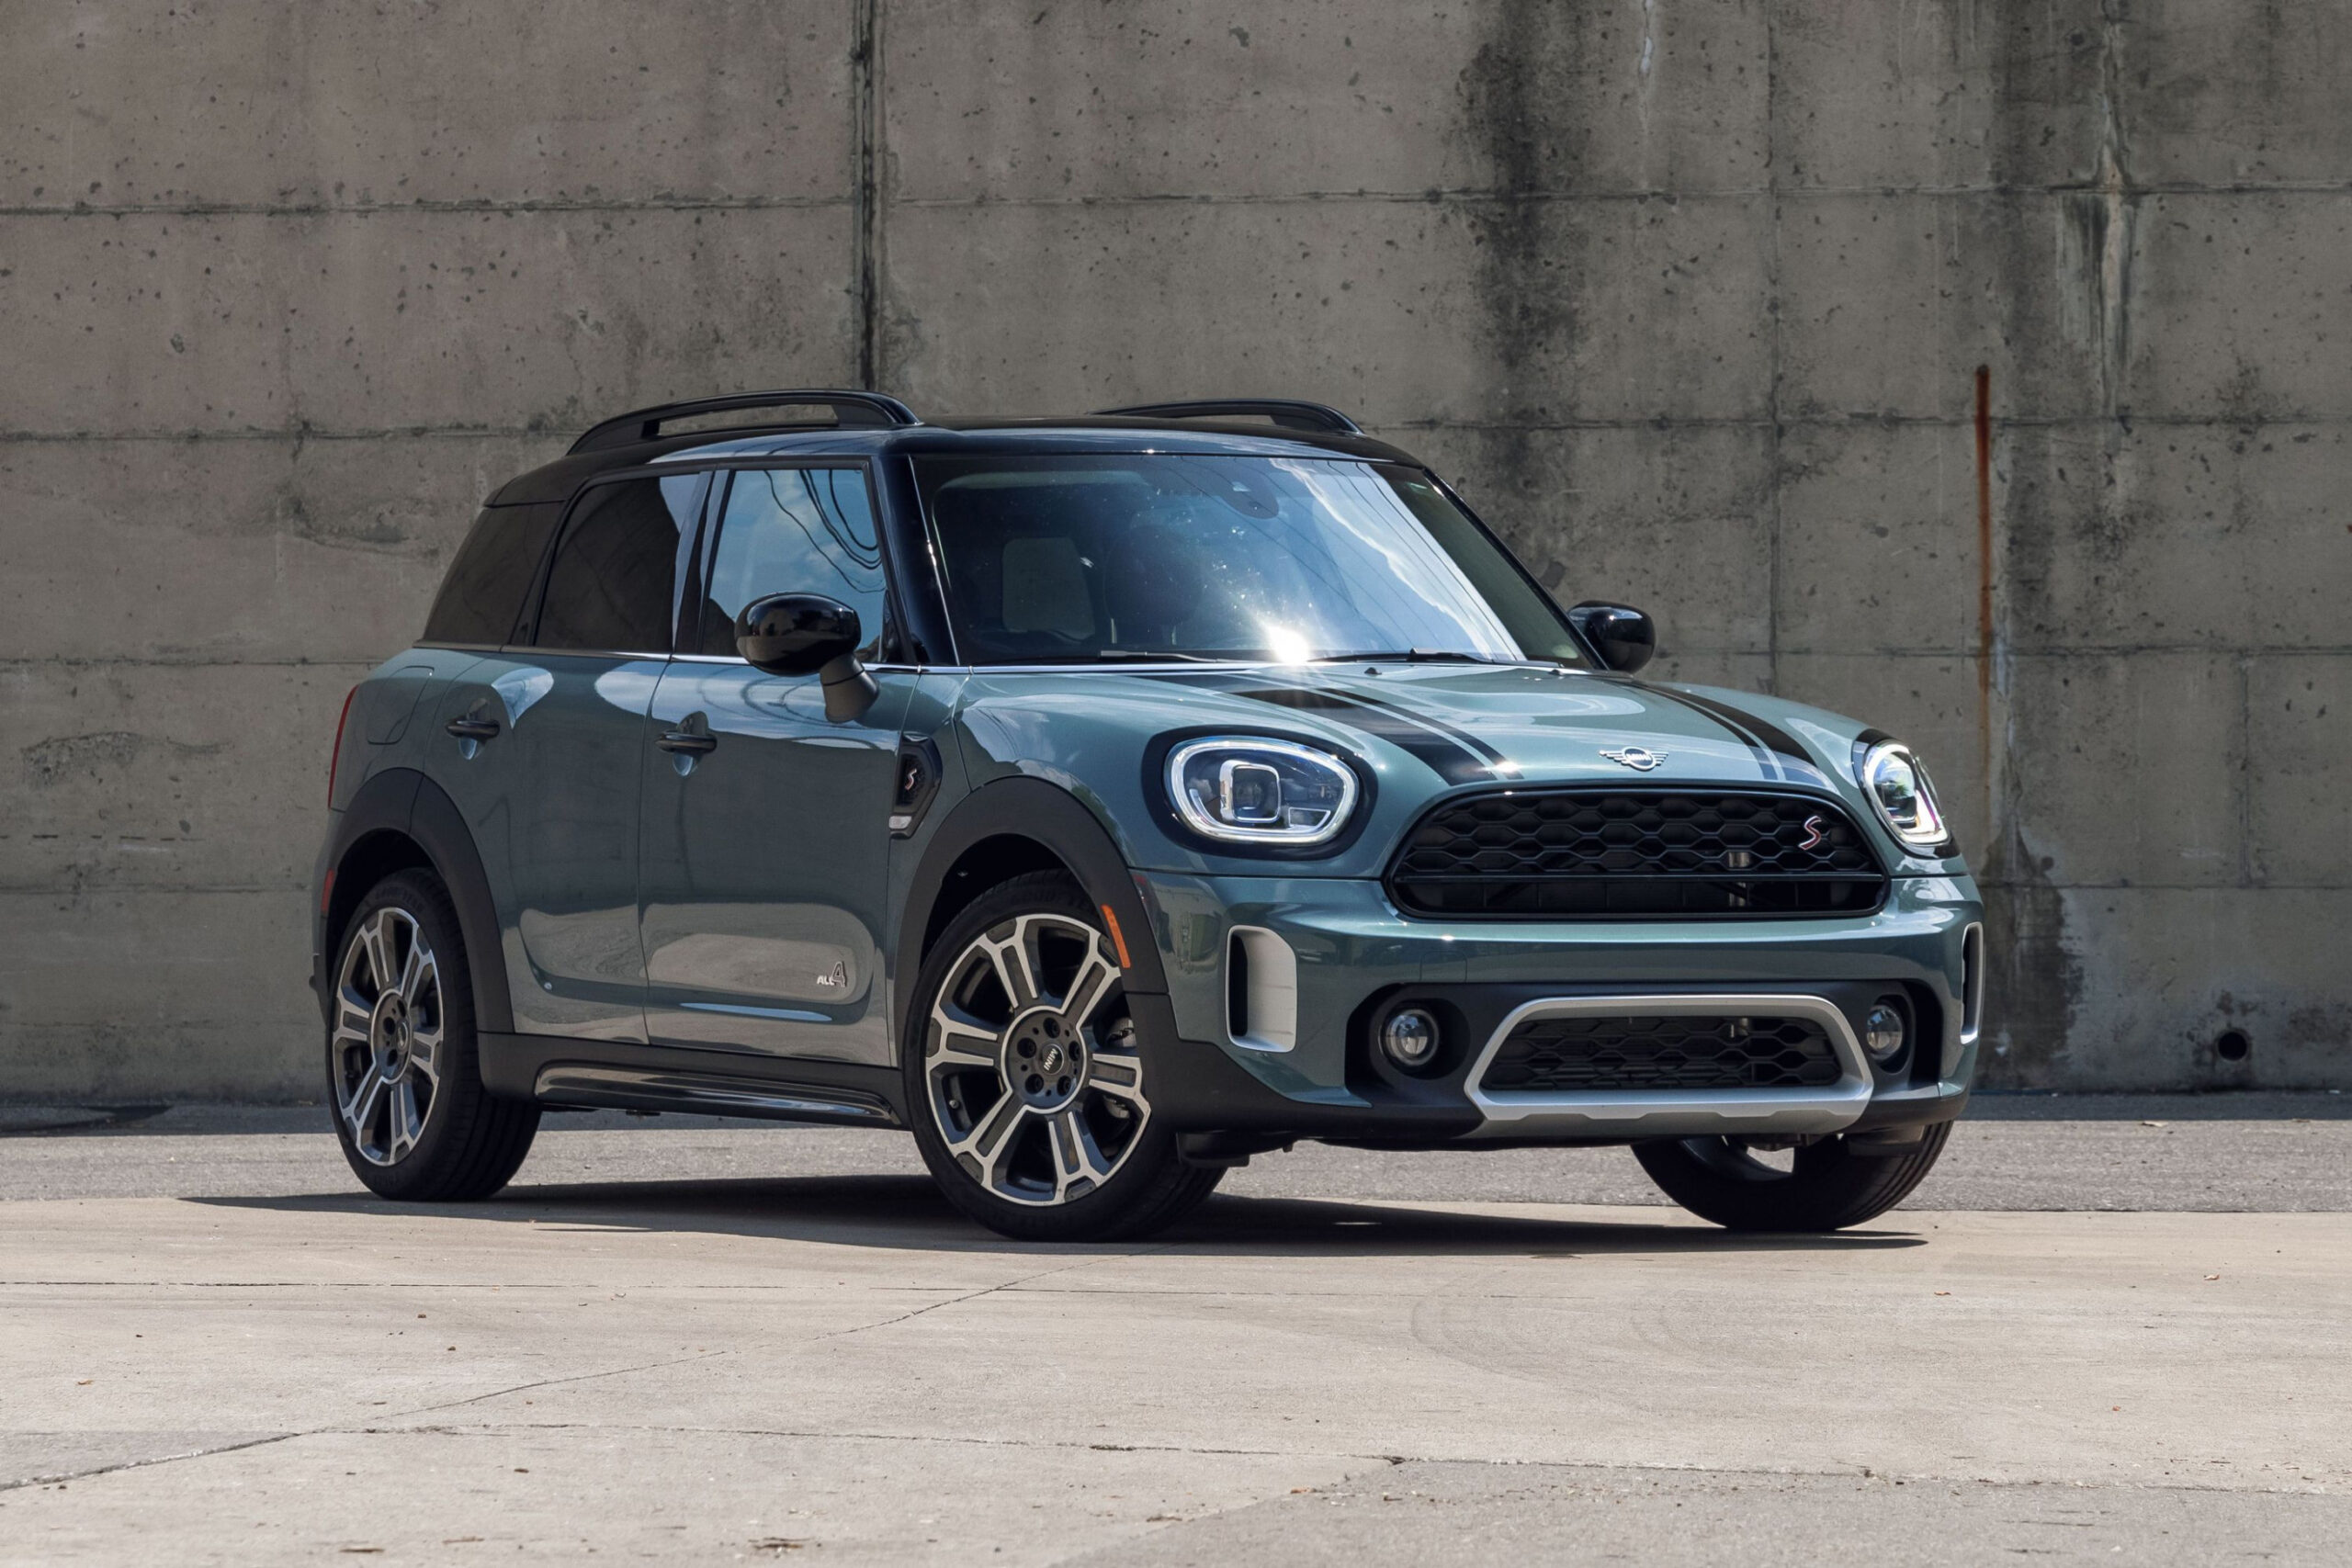 5 Mini Cooper Countryman Review, Pricing, and Specs - mini cooper countryman prices